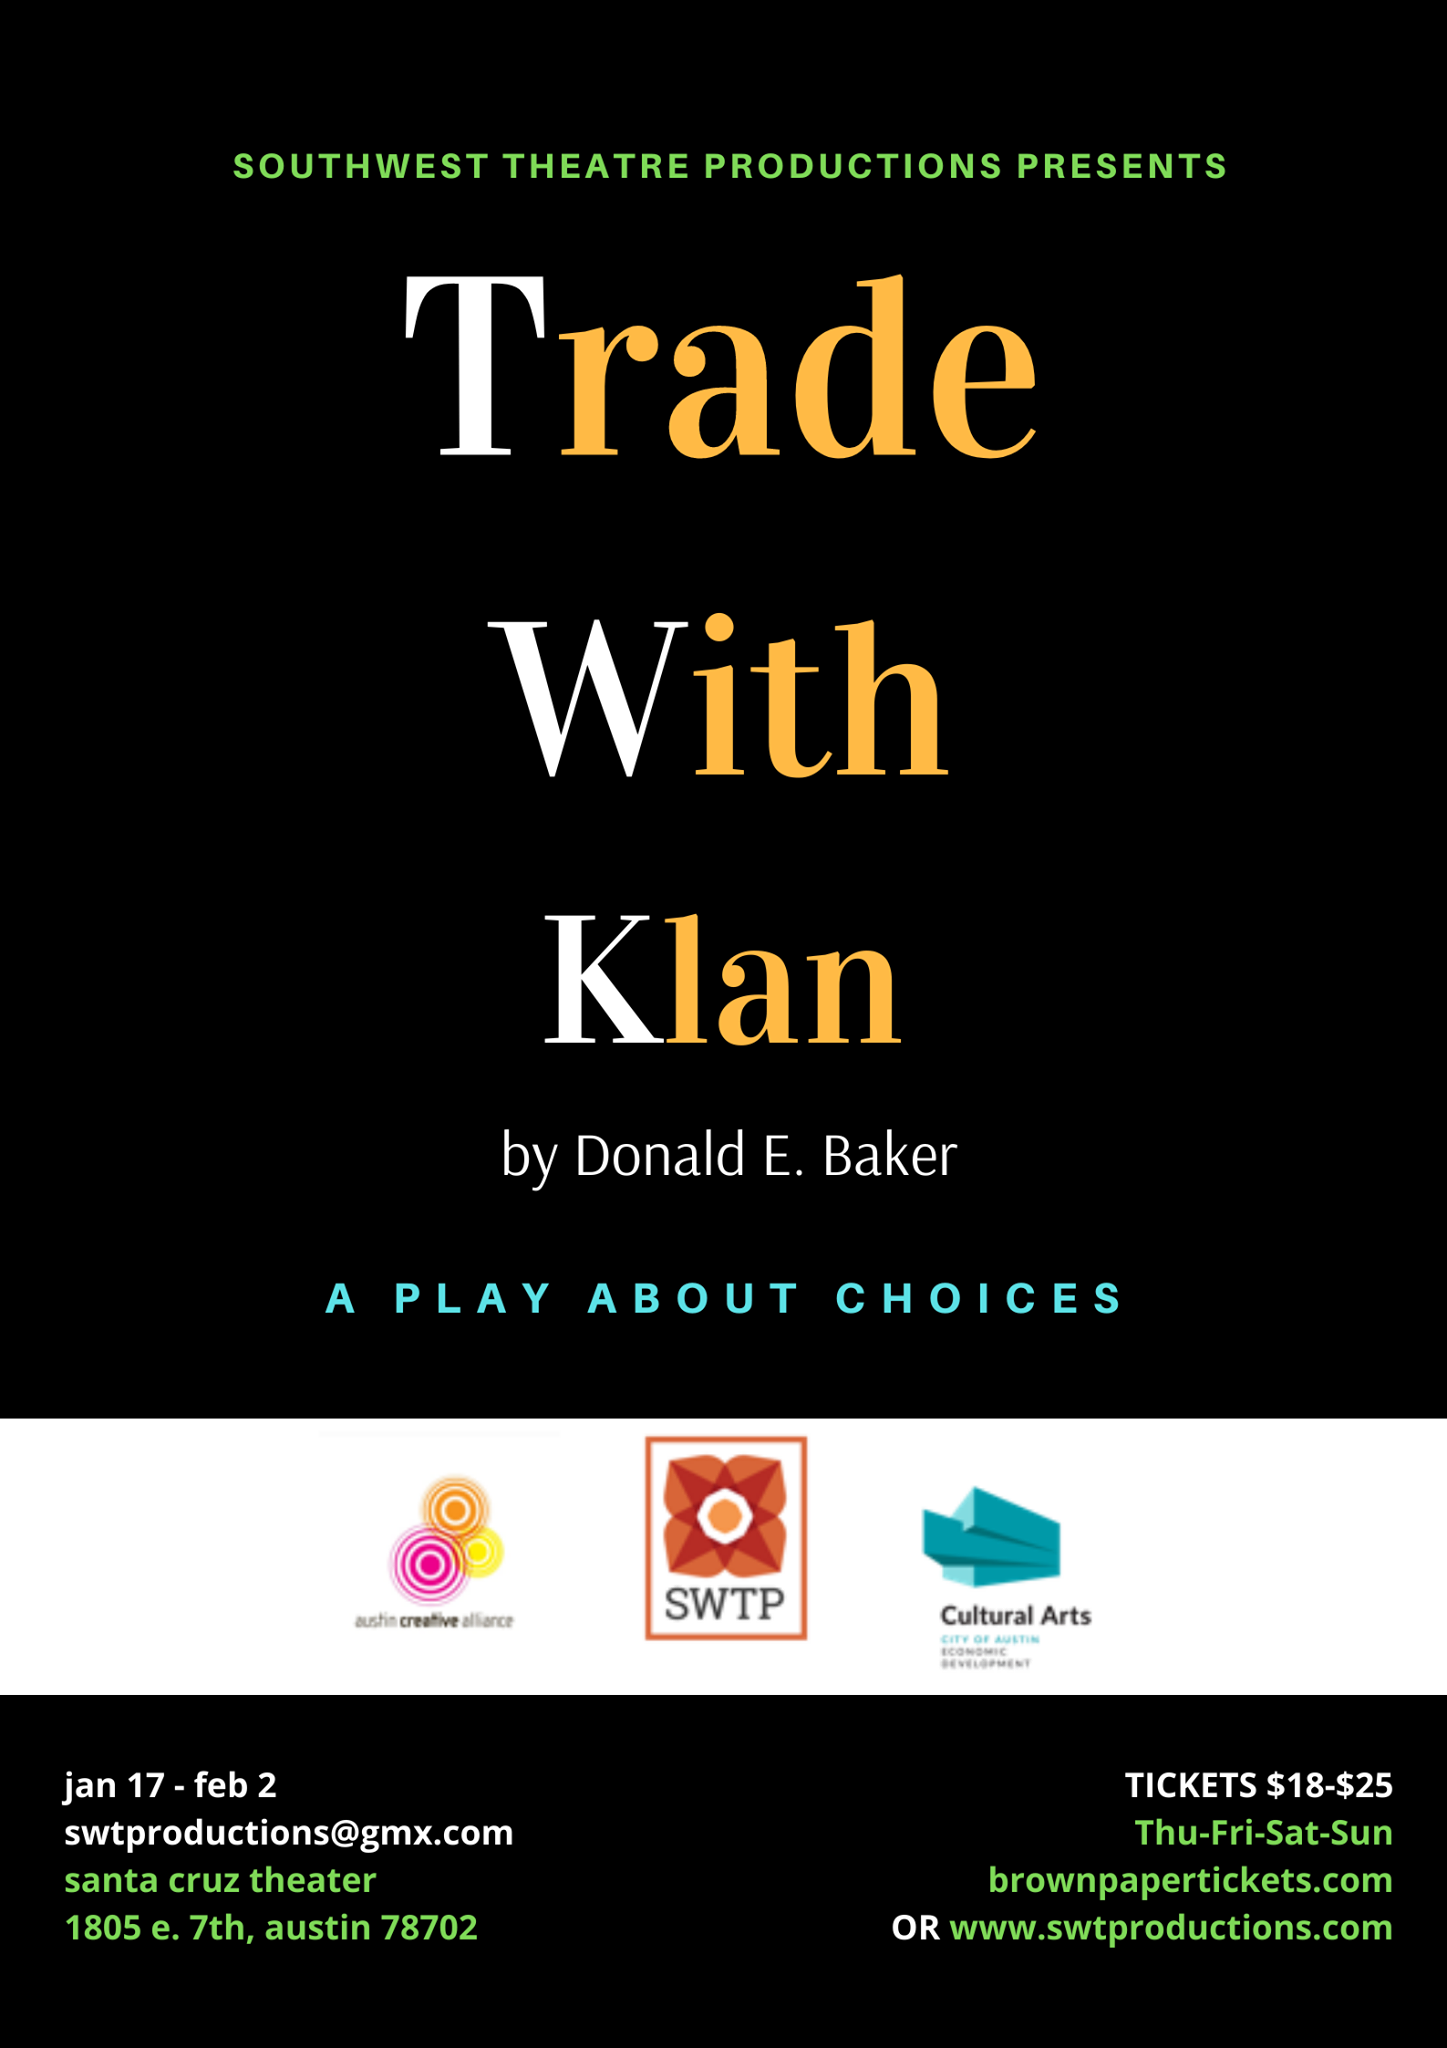 Trade with Klan by Southwest Theatre Productions